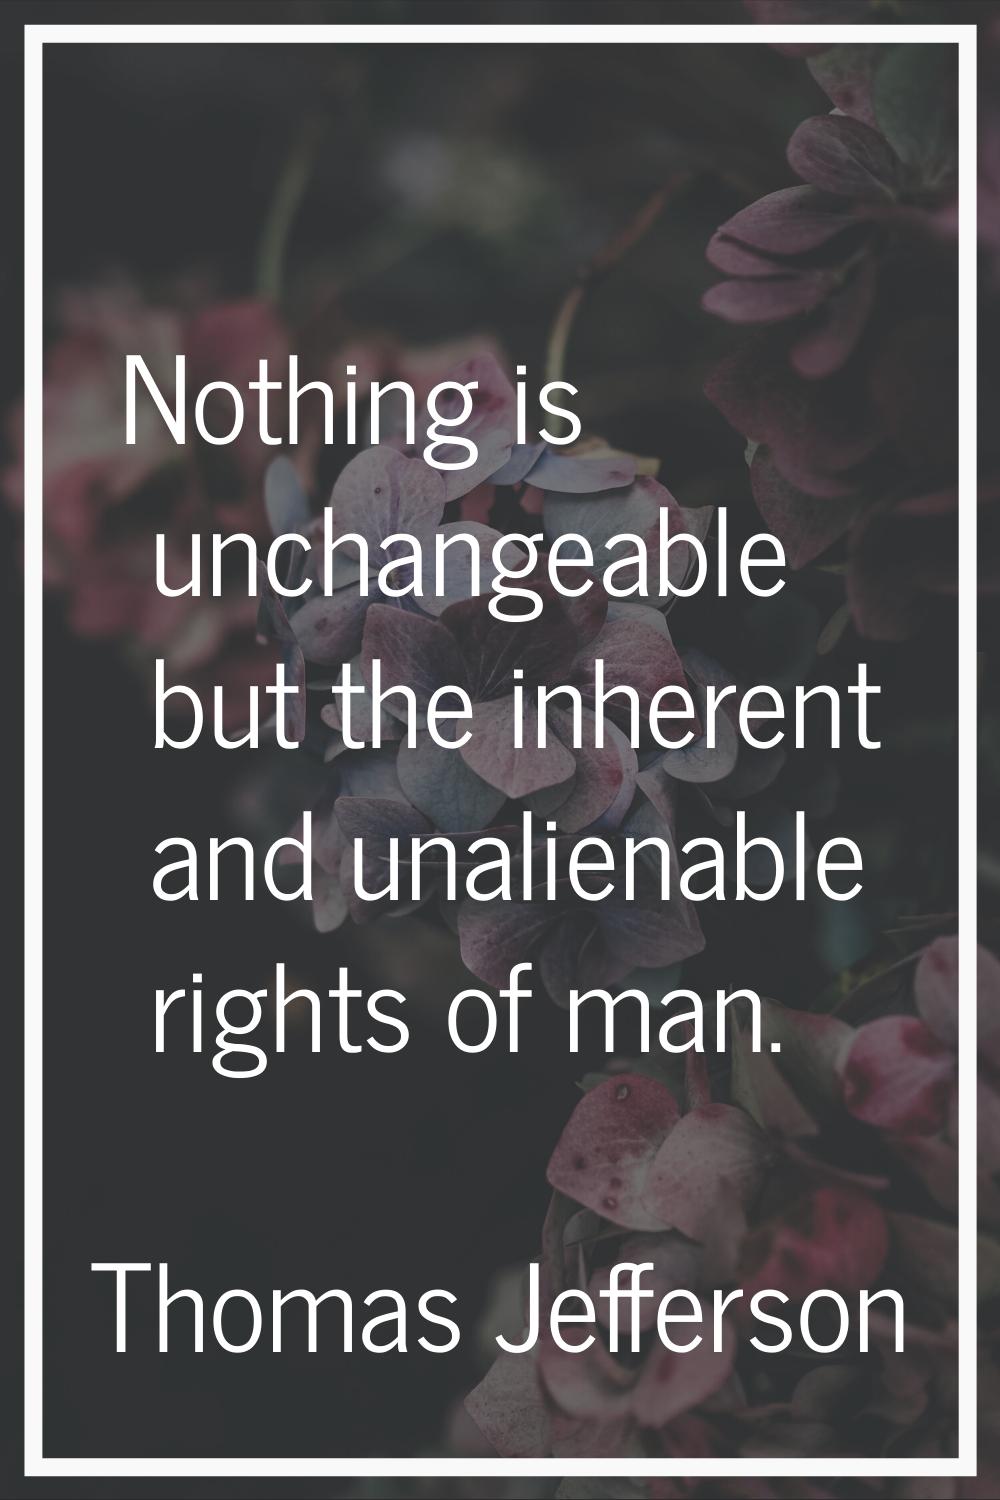 Nothing is unchangeable but the inherent and unalienable rights of man.